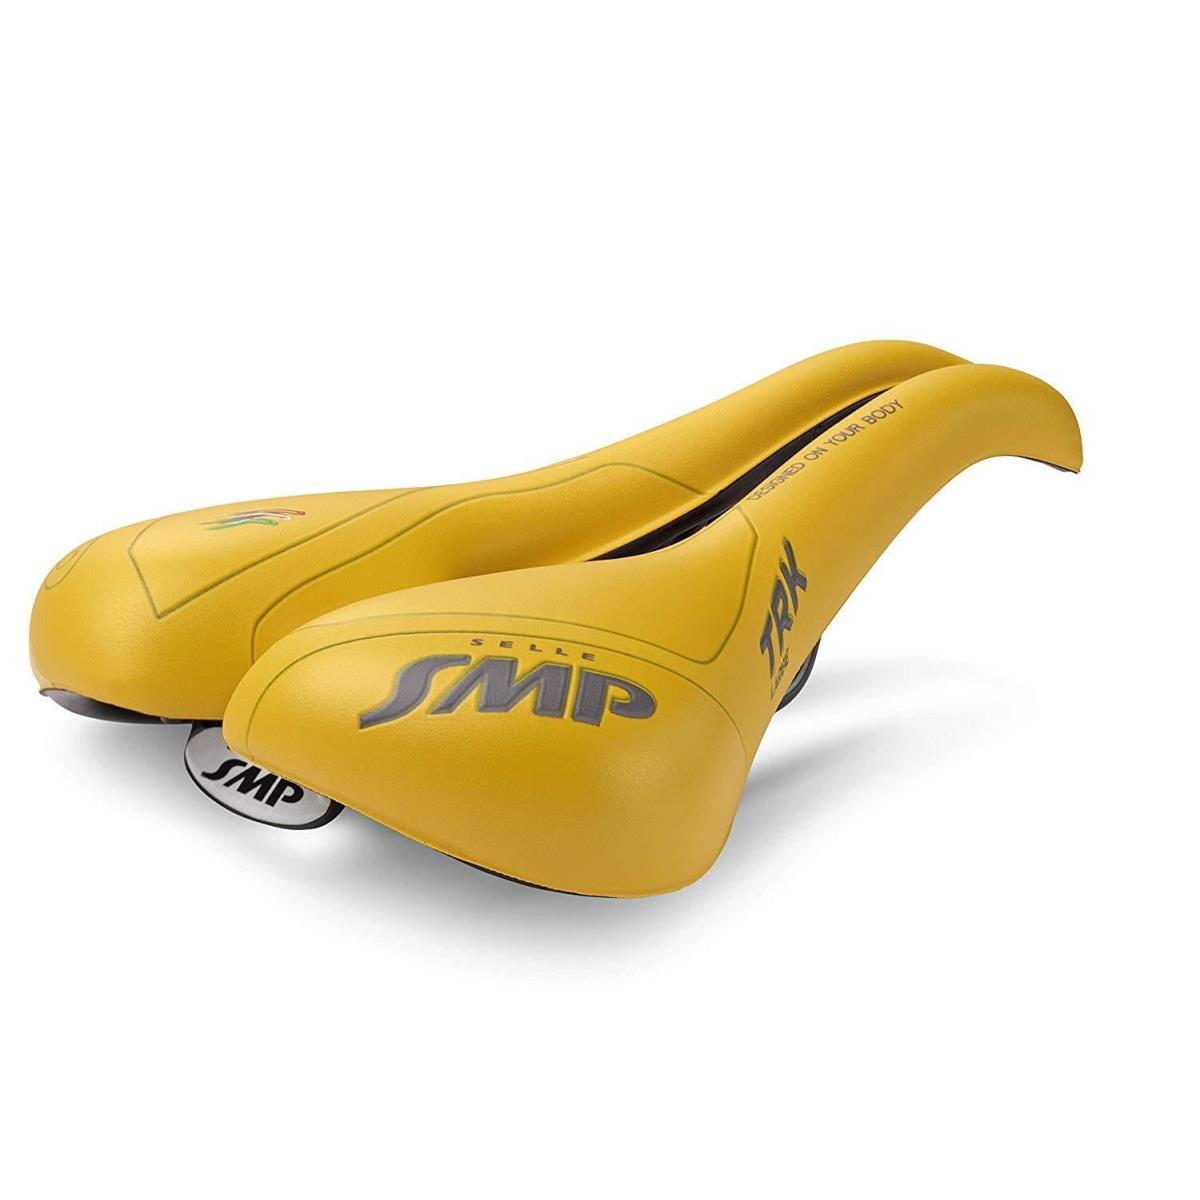 Selle Smp Trk Lady Cycling Saddle